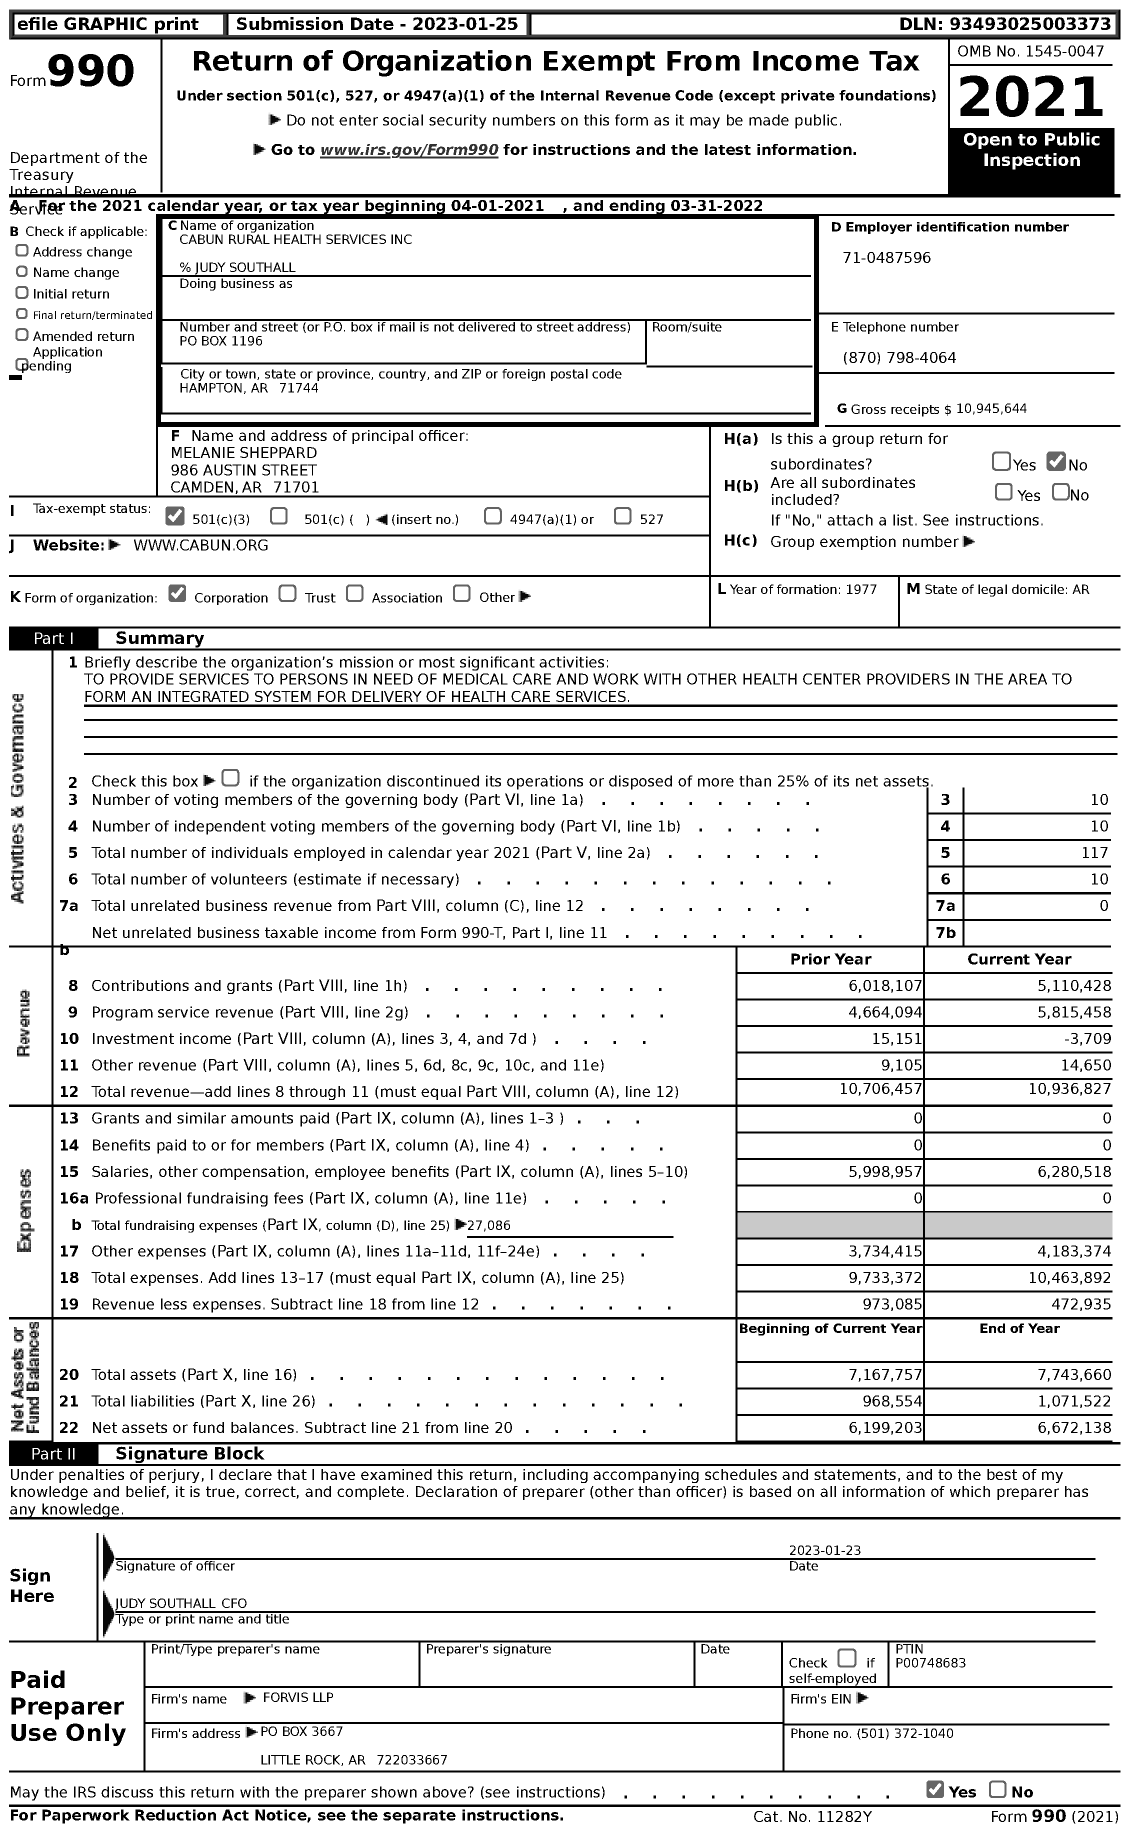 Image of first page of 2021 Form 990 for Cabun Rural Health Services